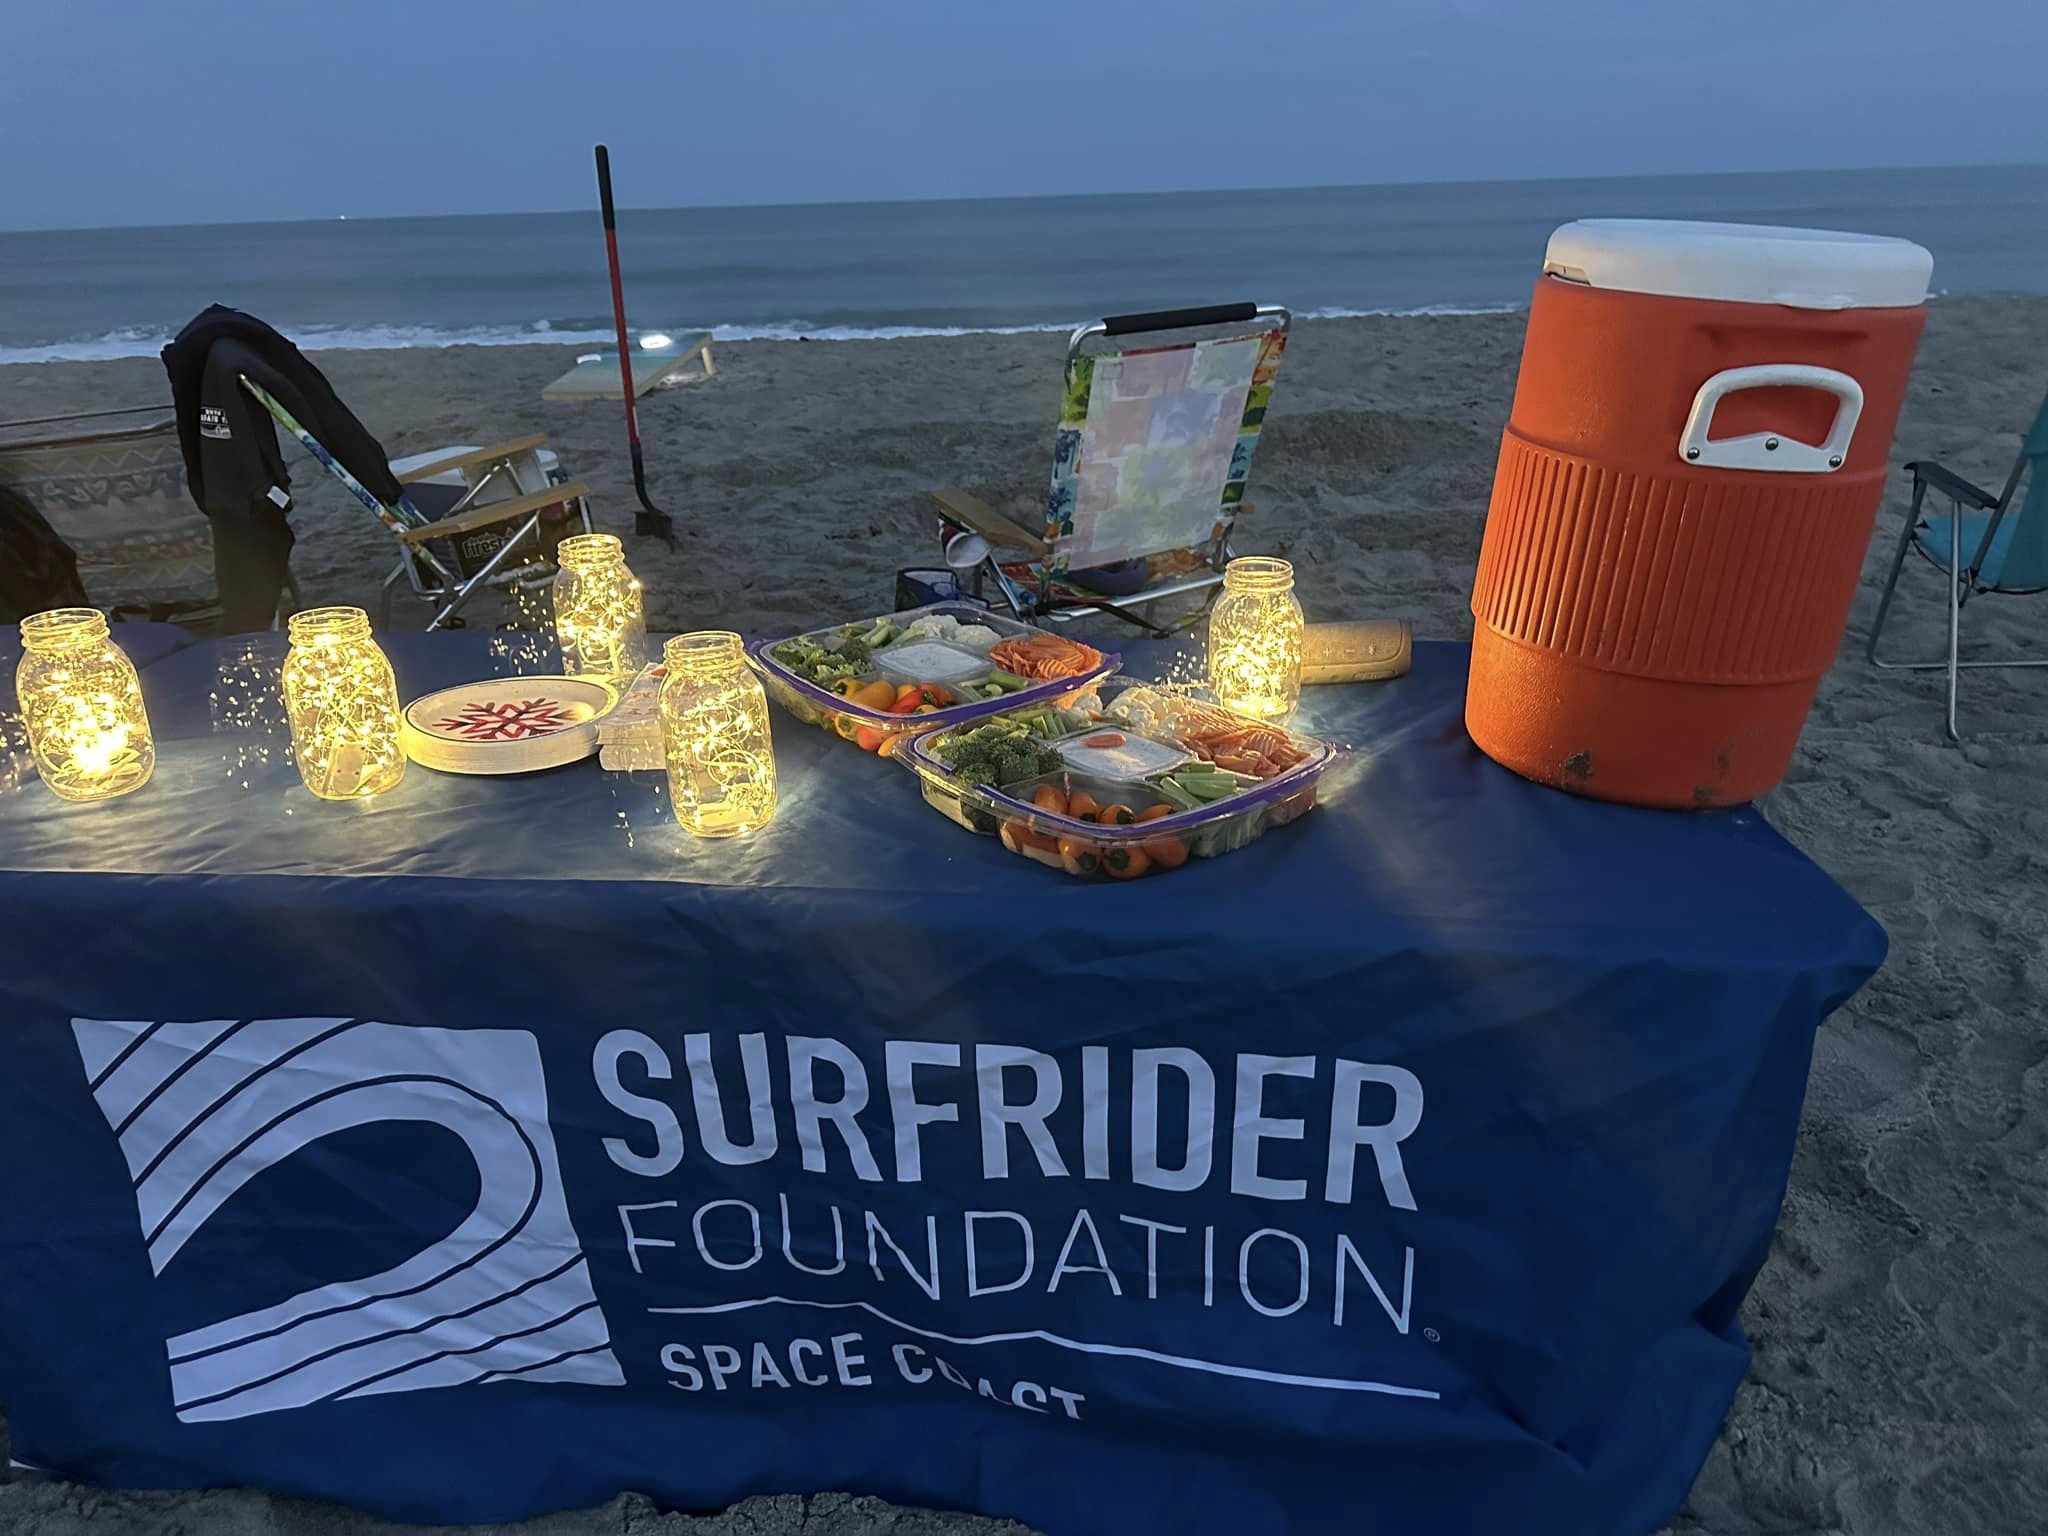 A table on the beach with a Surfrider-labeled tablecloth, topped with a water jug, lights, and veggie trays